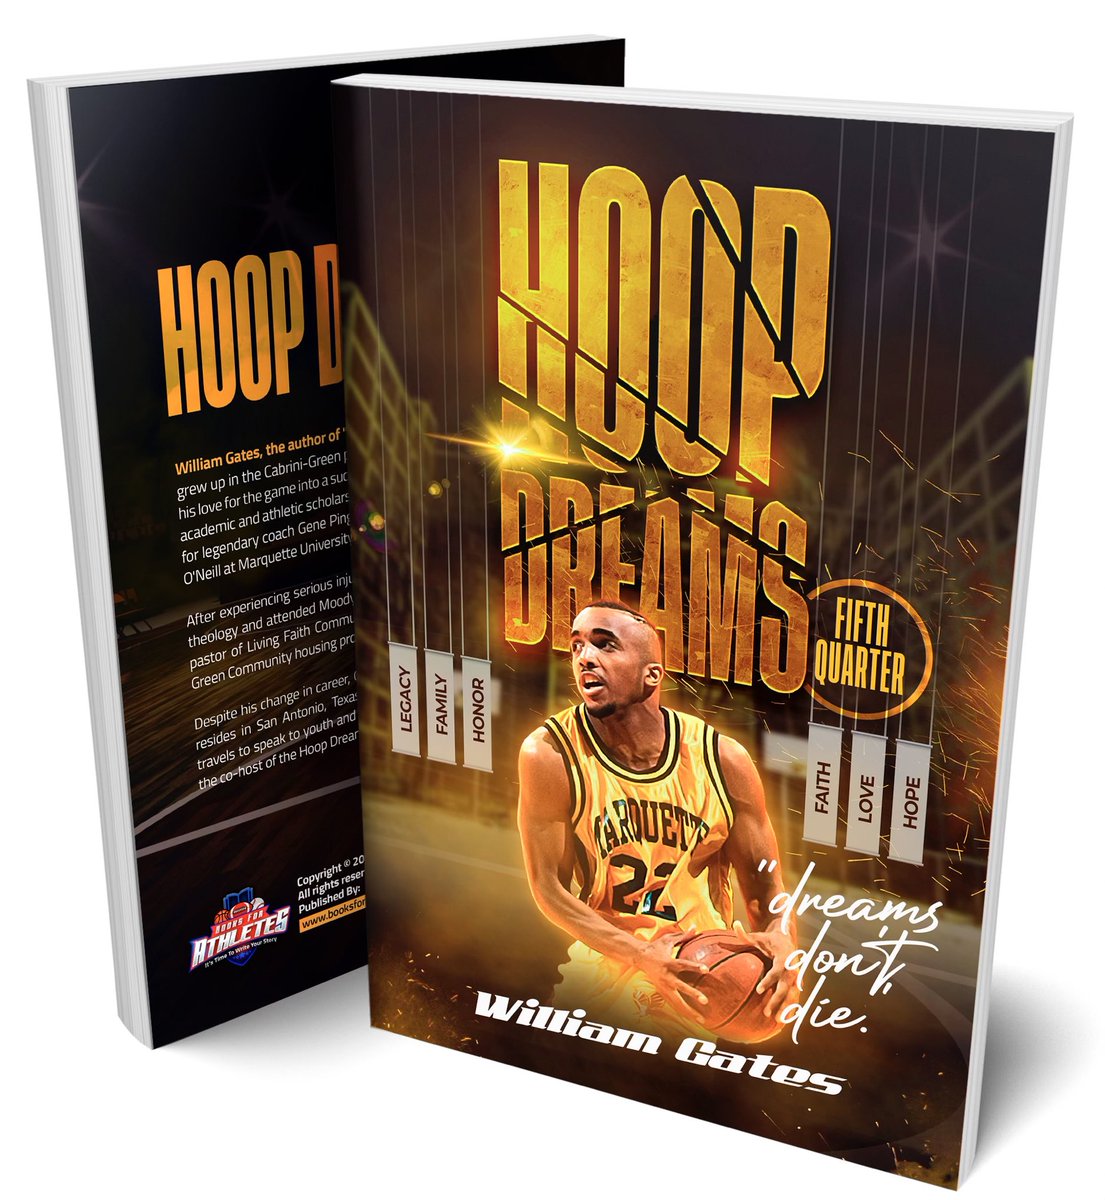 William Gates ⁦@hoop22dreams⁩ Releases New Book “HOOP DREAMS THE FIFTH QTR”💯🔥🏀👍🏾💪🏾☝🏾#DreamsNeverDie ⁦@NBCSChicago⁩ ⁦@cbschicago⁩ ⁦@ABC7Chicago⁩ ⁦@MedcalfByESPN⁩ ⁦@FOXSports⁩ ⁦@WGNNews⁩ ⁦@GMA⁩ ⁦@FirstTake⁩ ⁦